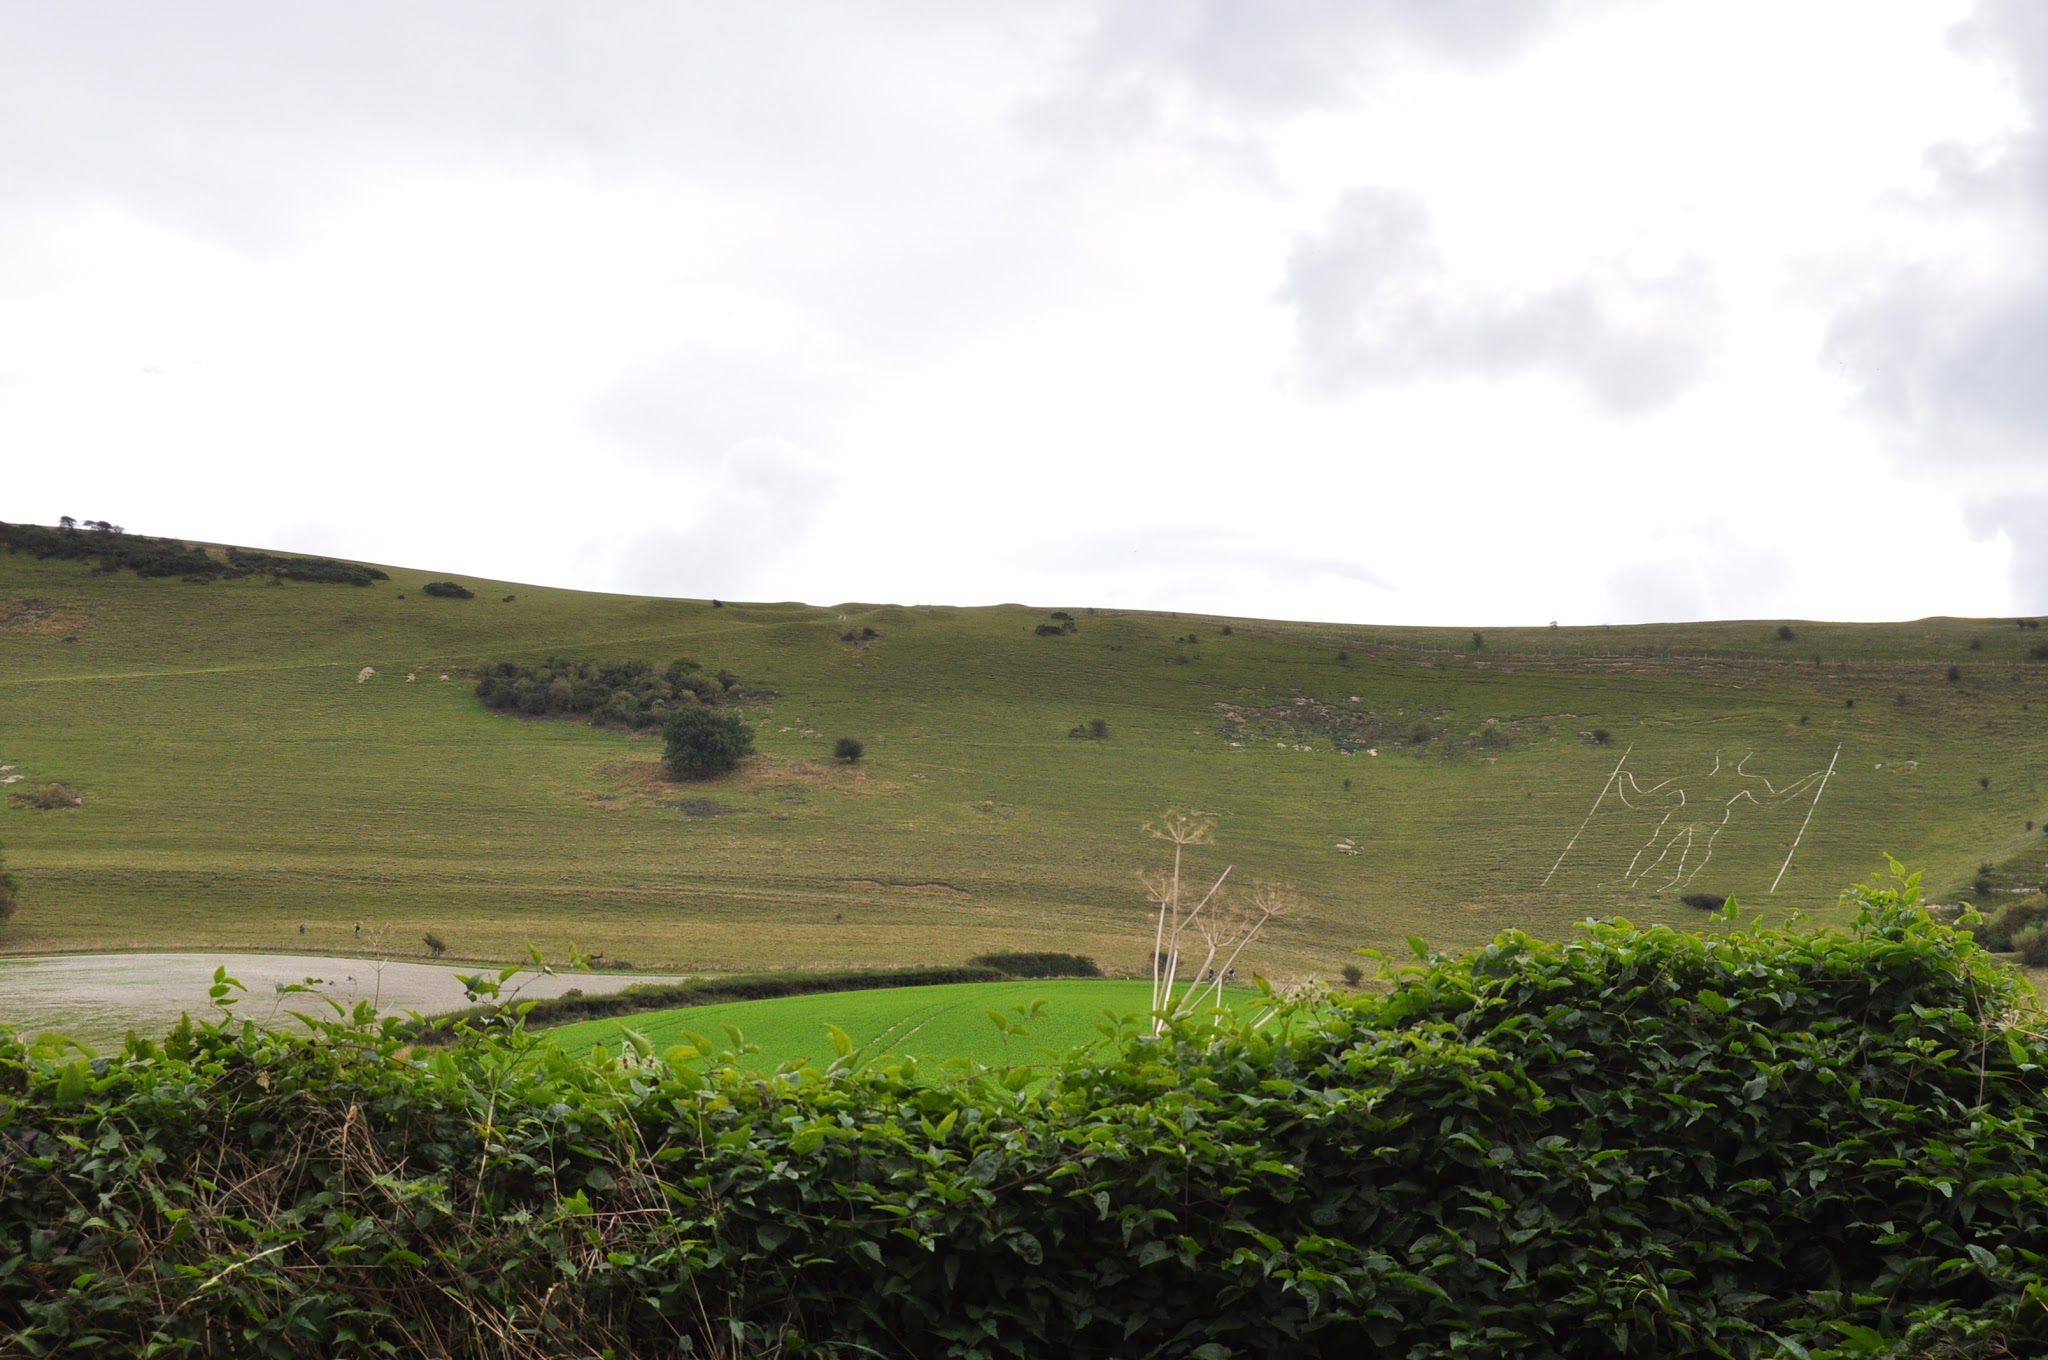 Days Out in Sussex - Alfriston and the Cuckmere Valley, photo by modern bric a brac